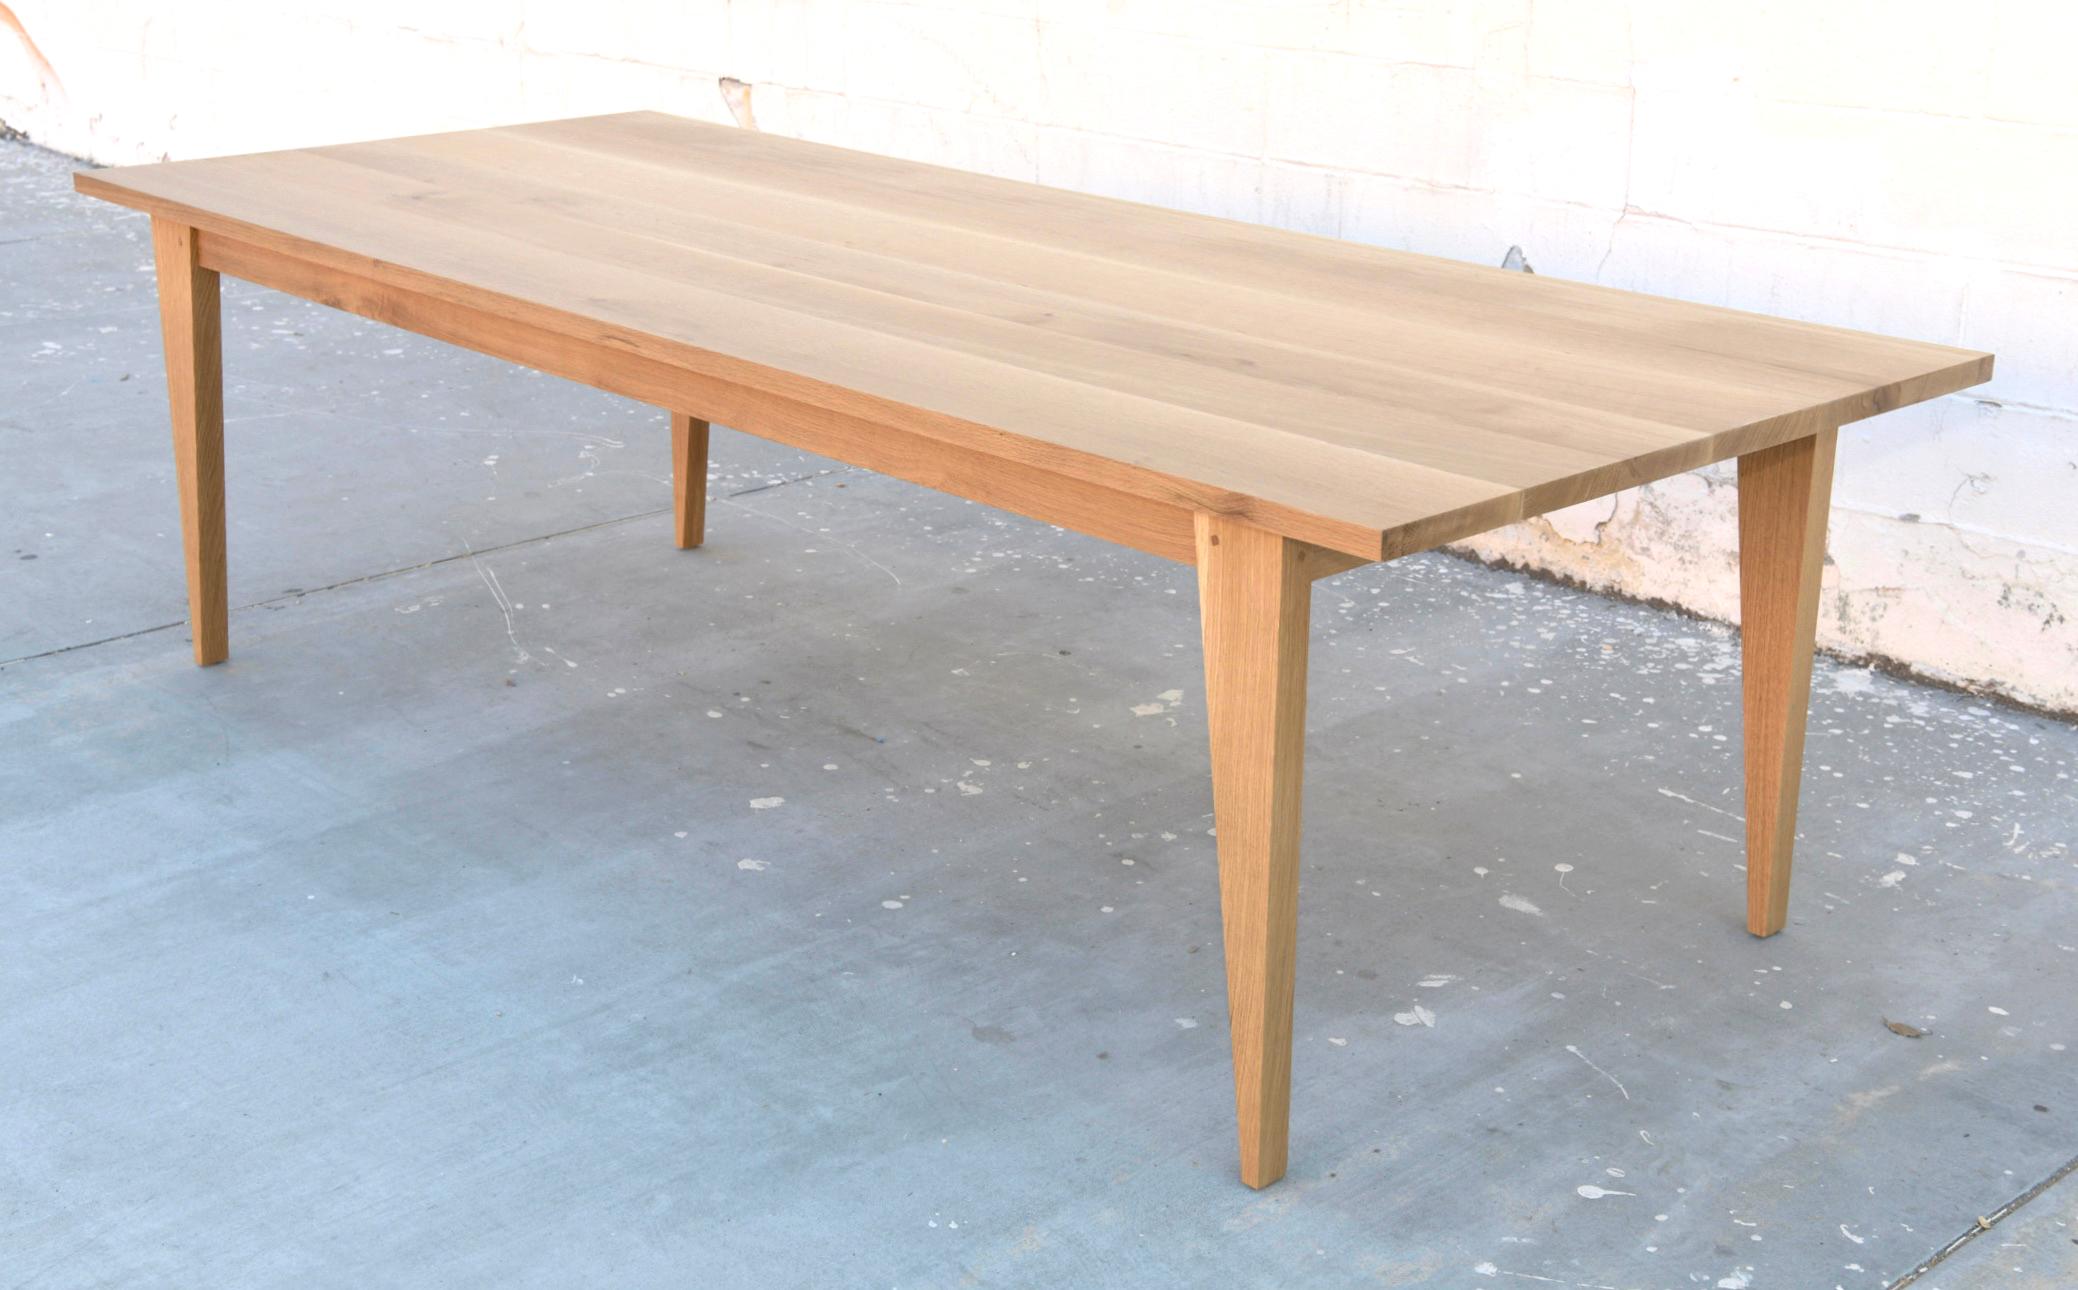 This custom dining table made from quarter sawn oak expands from 102